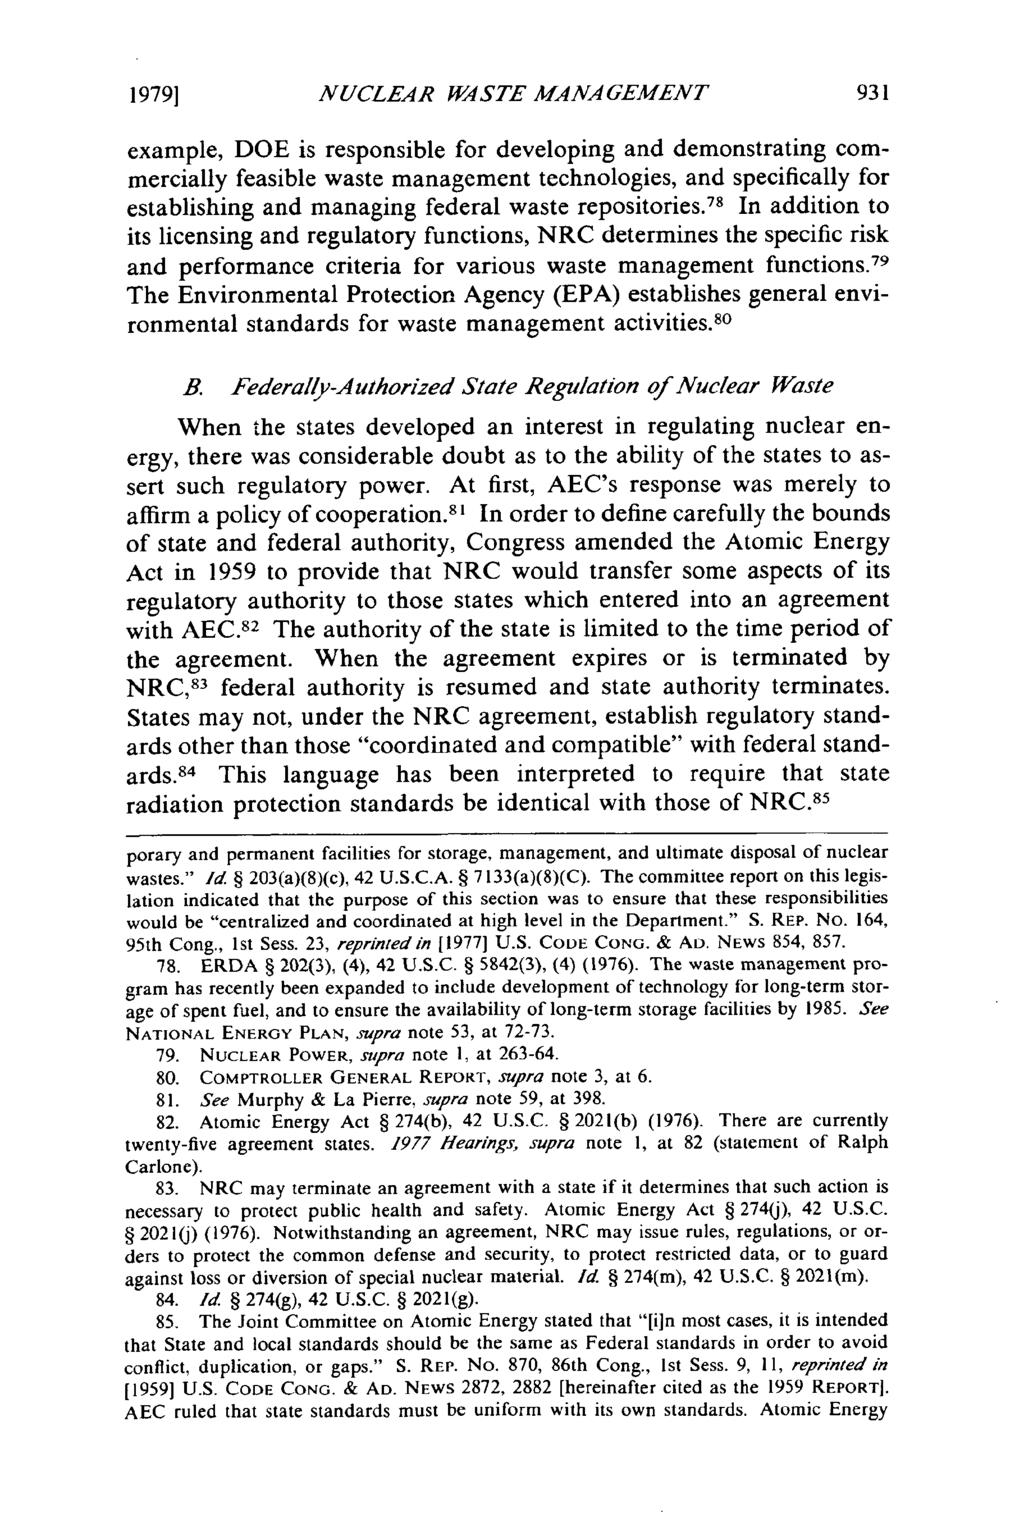 19791 NUCLEAR WASTE MANA GEMENT example, DOE is responsible for developing and demonstrating commercially feasible waste management technologies, and specifically for establishing and managing